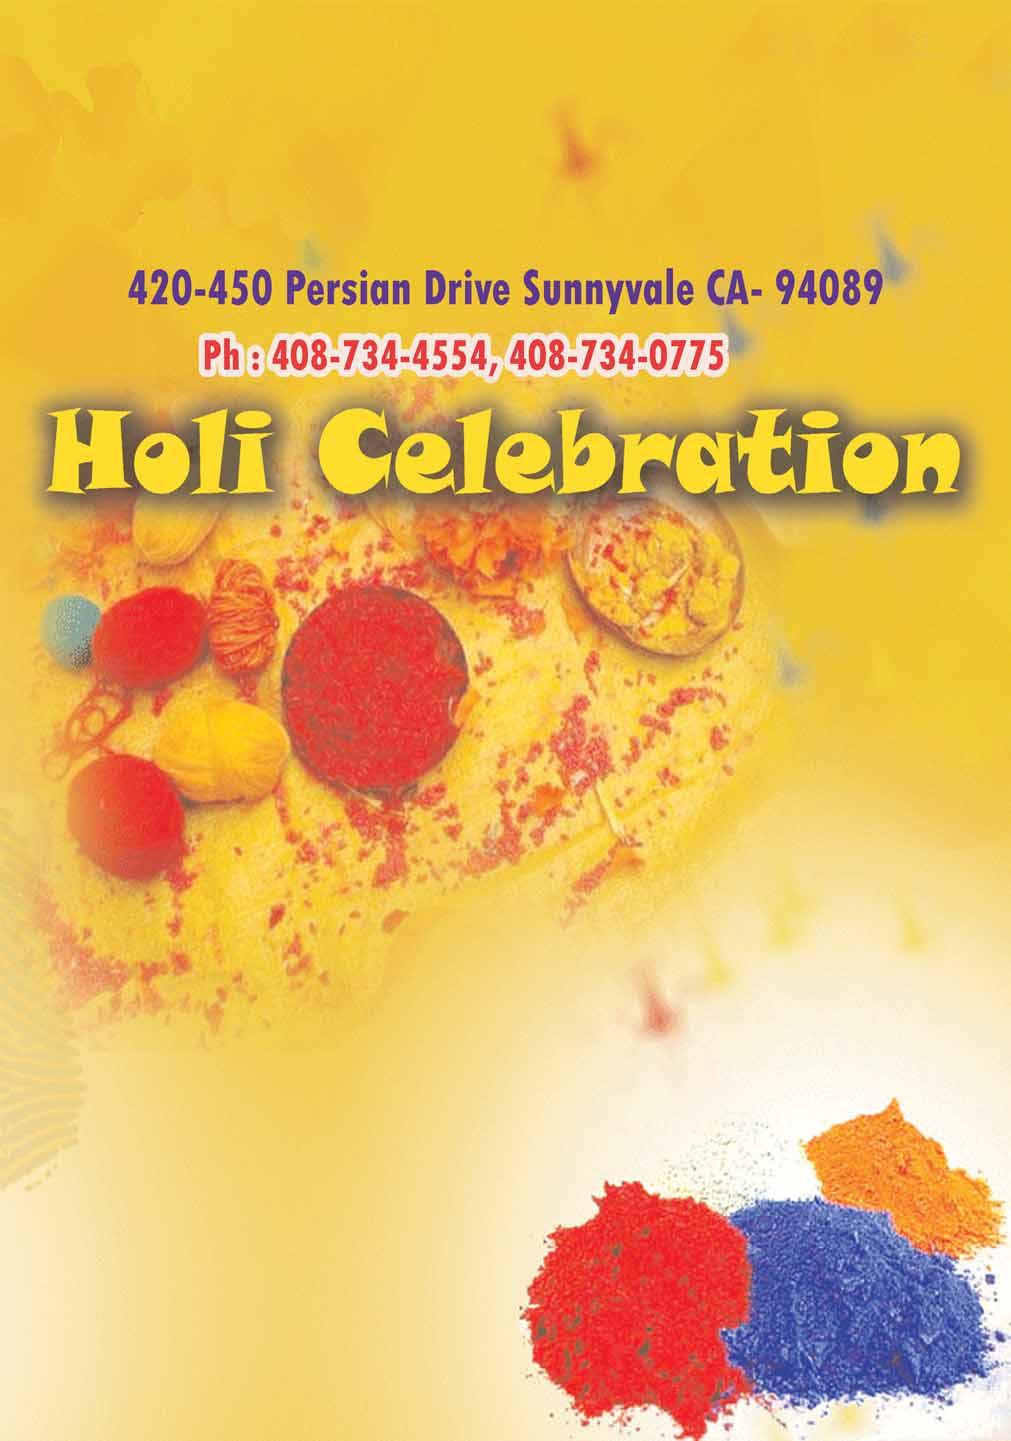 March 3 to 9, 2011 22 Sunnyvale Hindu Temple & Communality Center DAILY AARTI (AFTERNOON) MONDAY-FRIDAY 12.00 NOON SATURDAY 11.00 AM SUNDAY 1.30 PM EVENING ALL DAYS- 8.30 PM (SUMMER)/8.